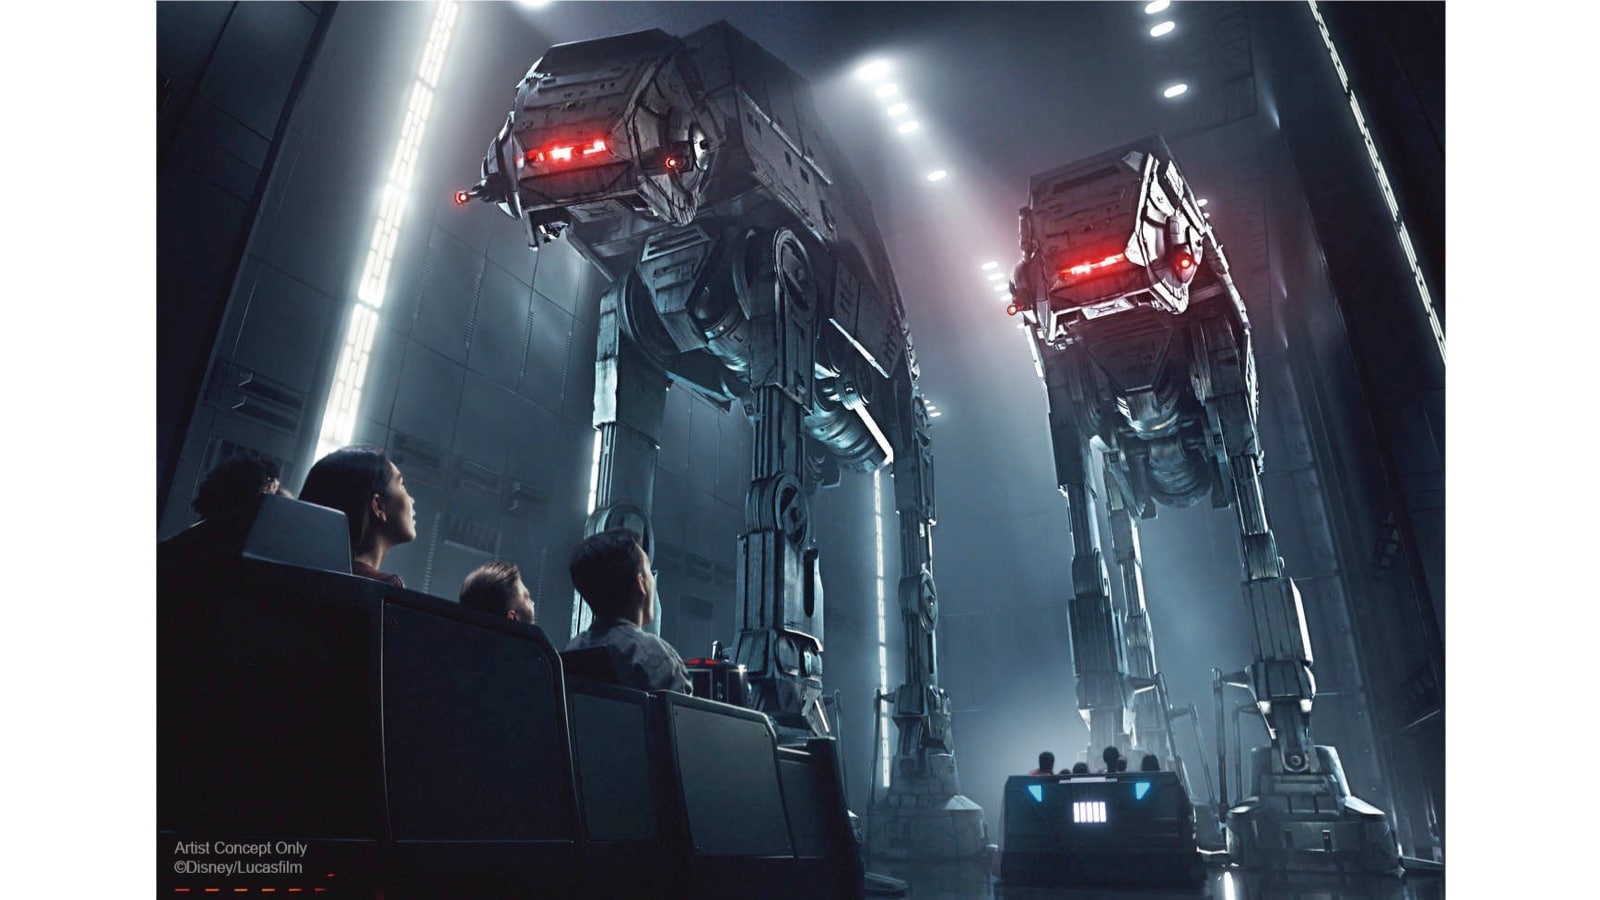 Timing for Opening of Star Wars: Rise of the Resistance Announced | Disney Parks Blog